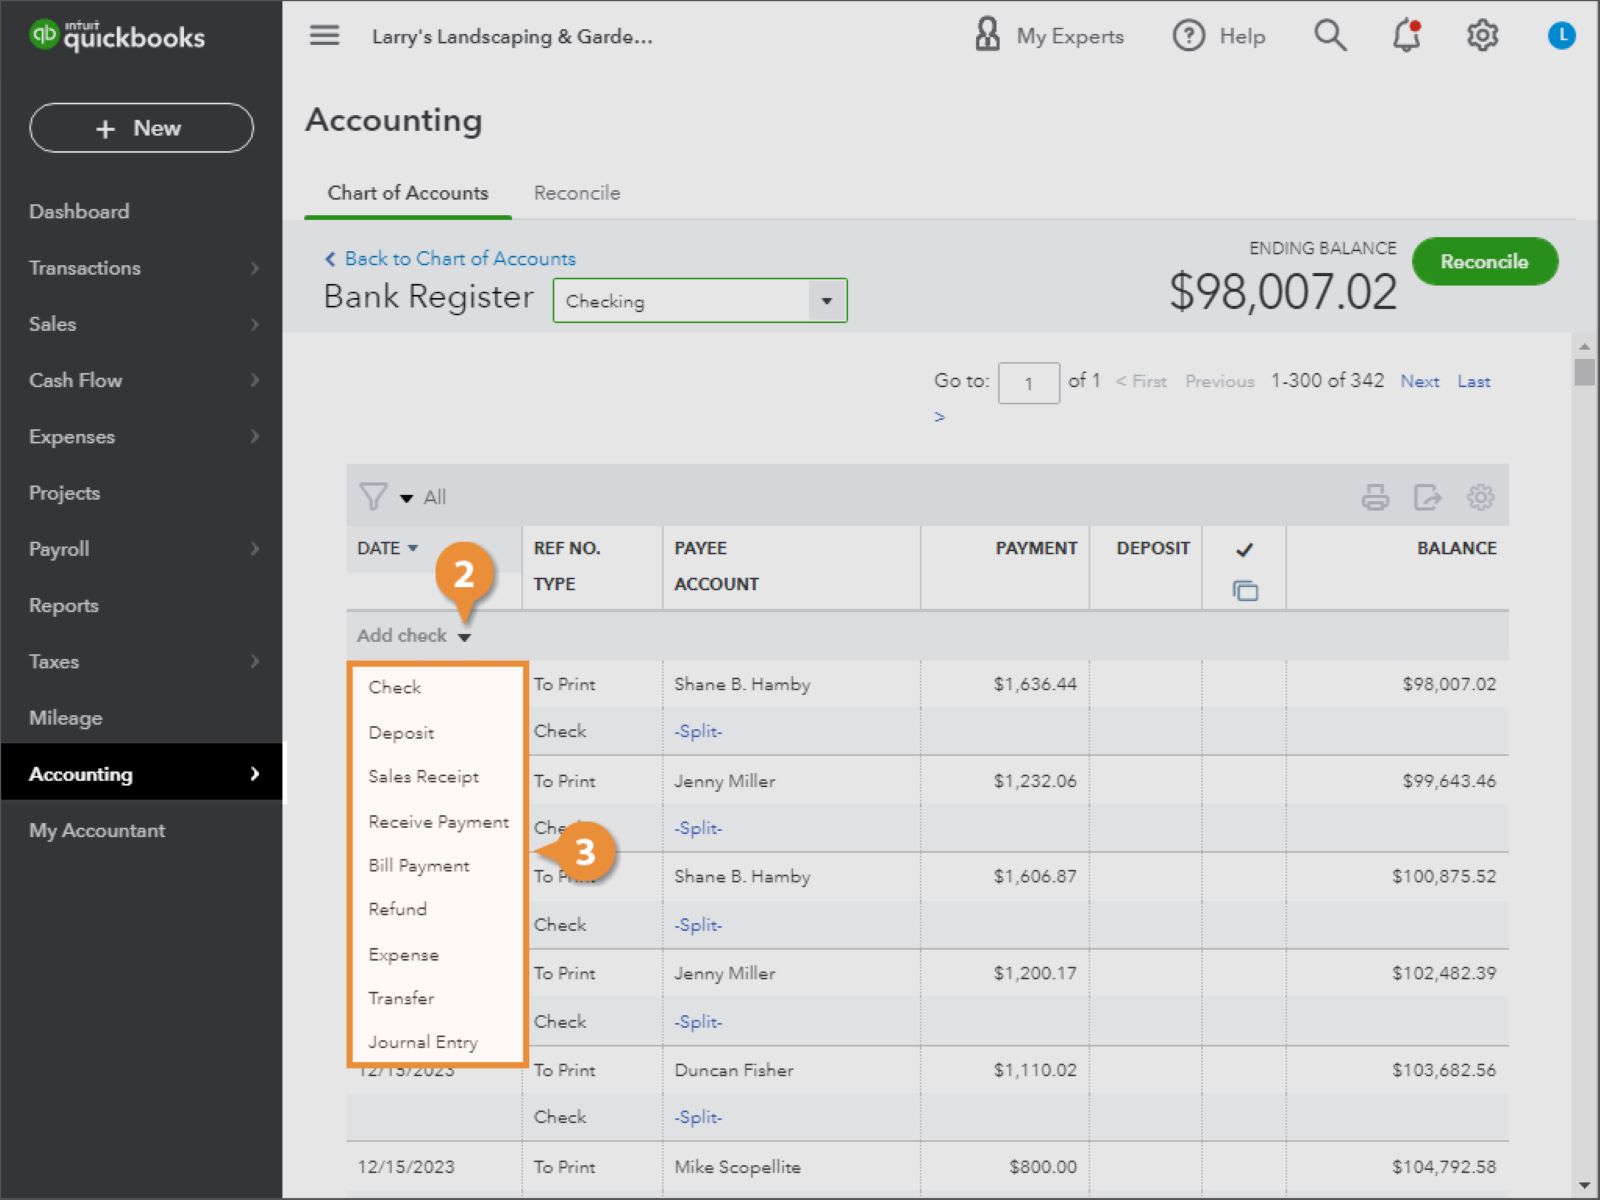 How To Add A Transaction In Quickbooks Online